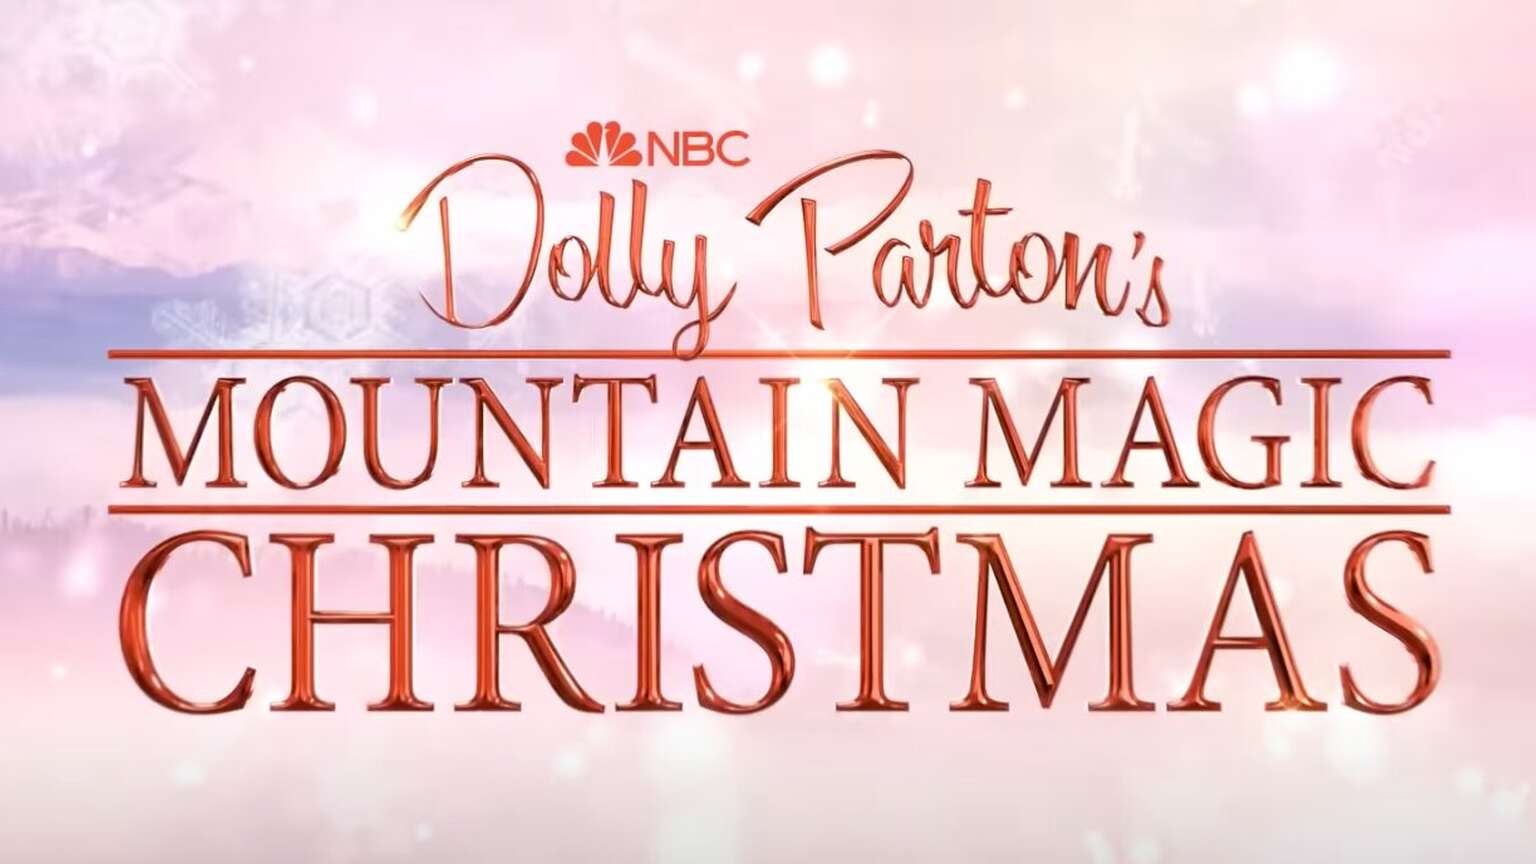 How to Watch ‘Dolly Parton’s Mountain Magic Christmas’ for Free on